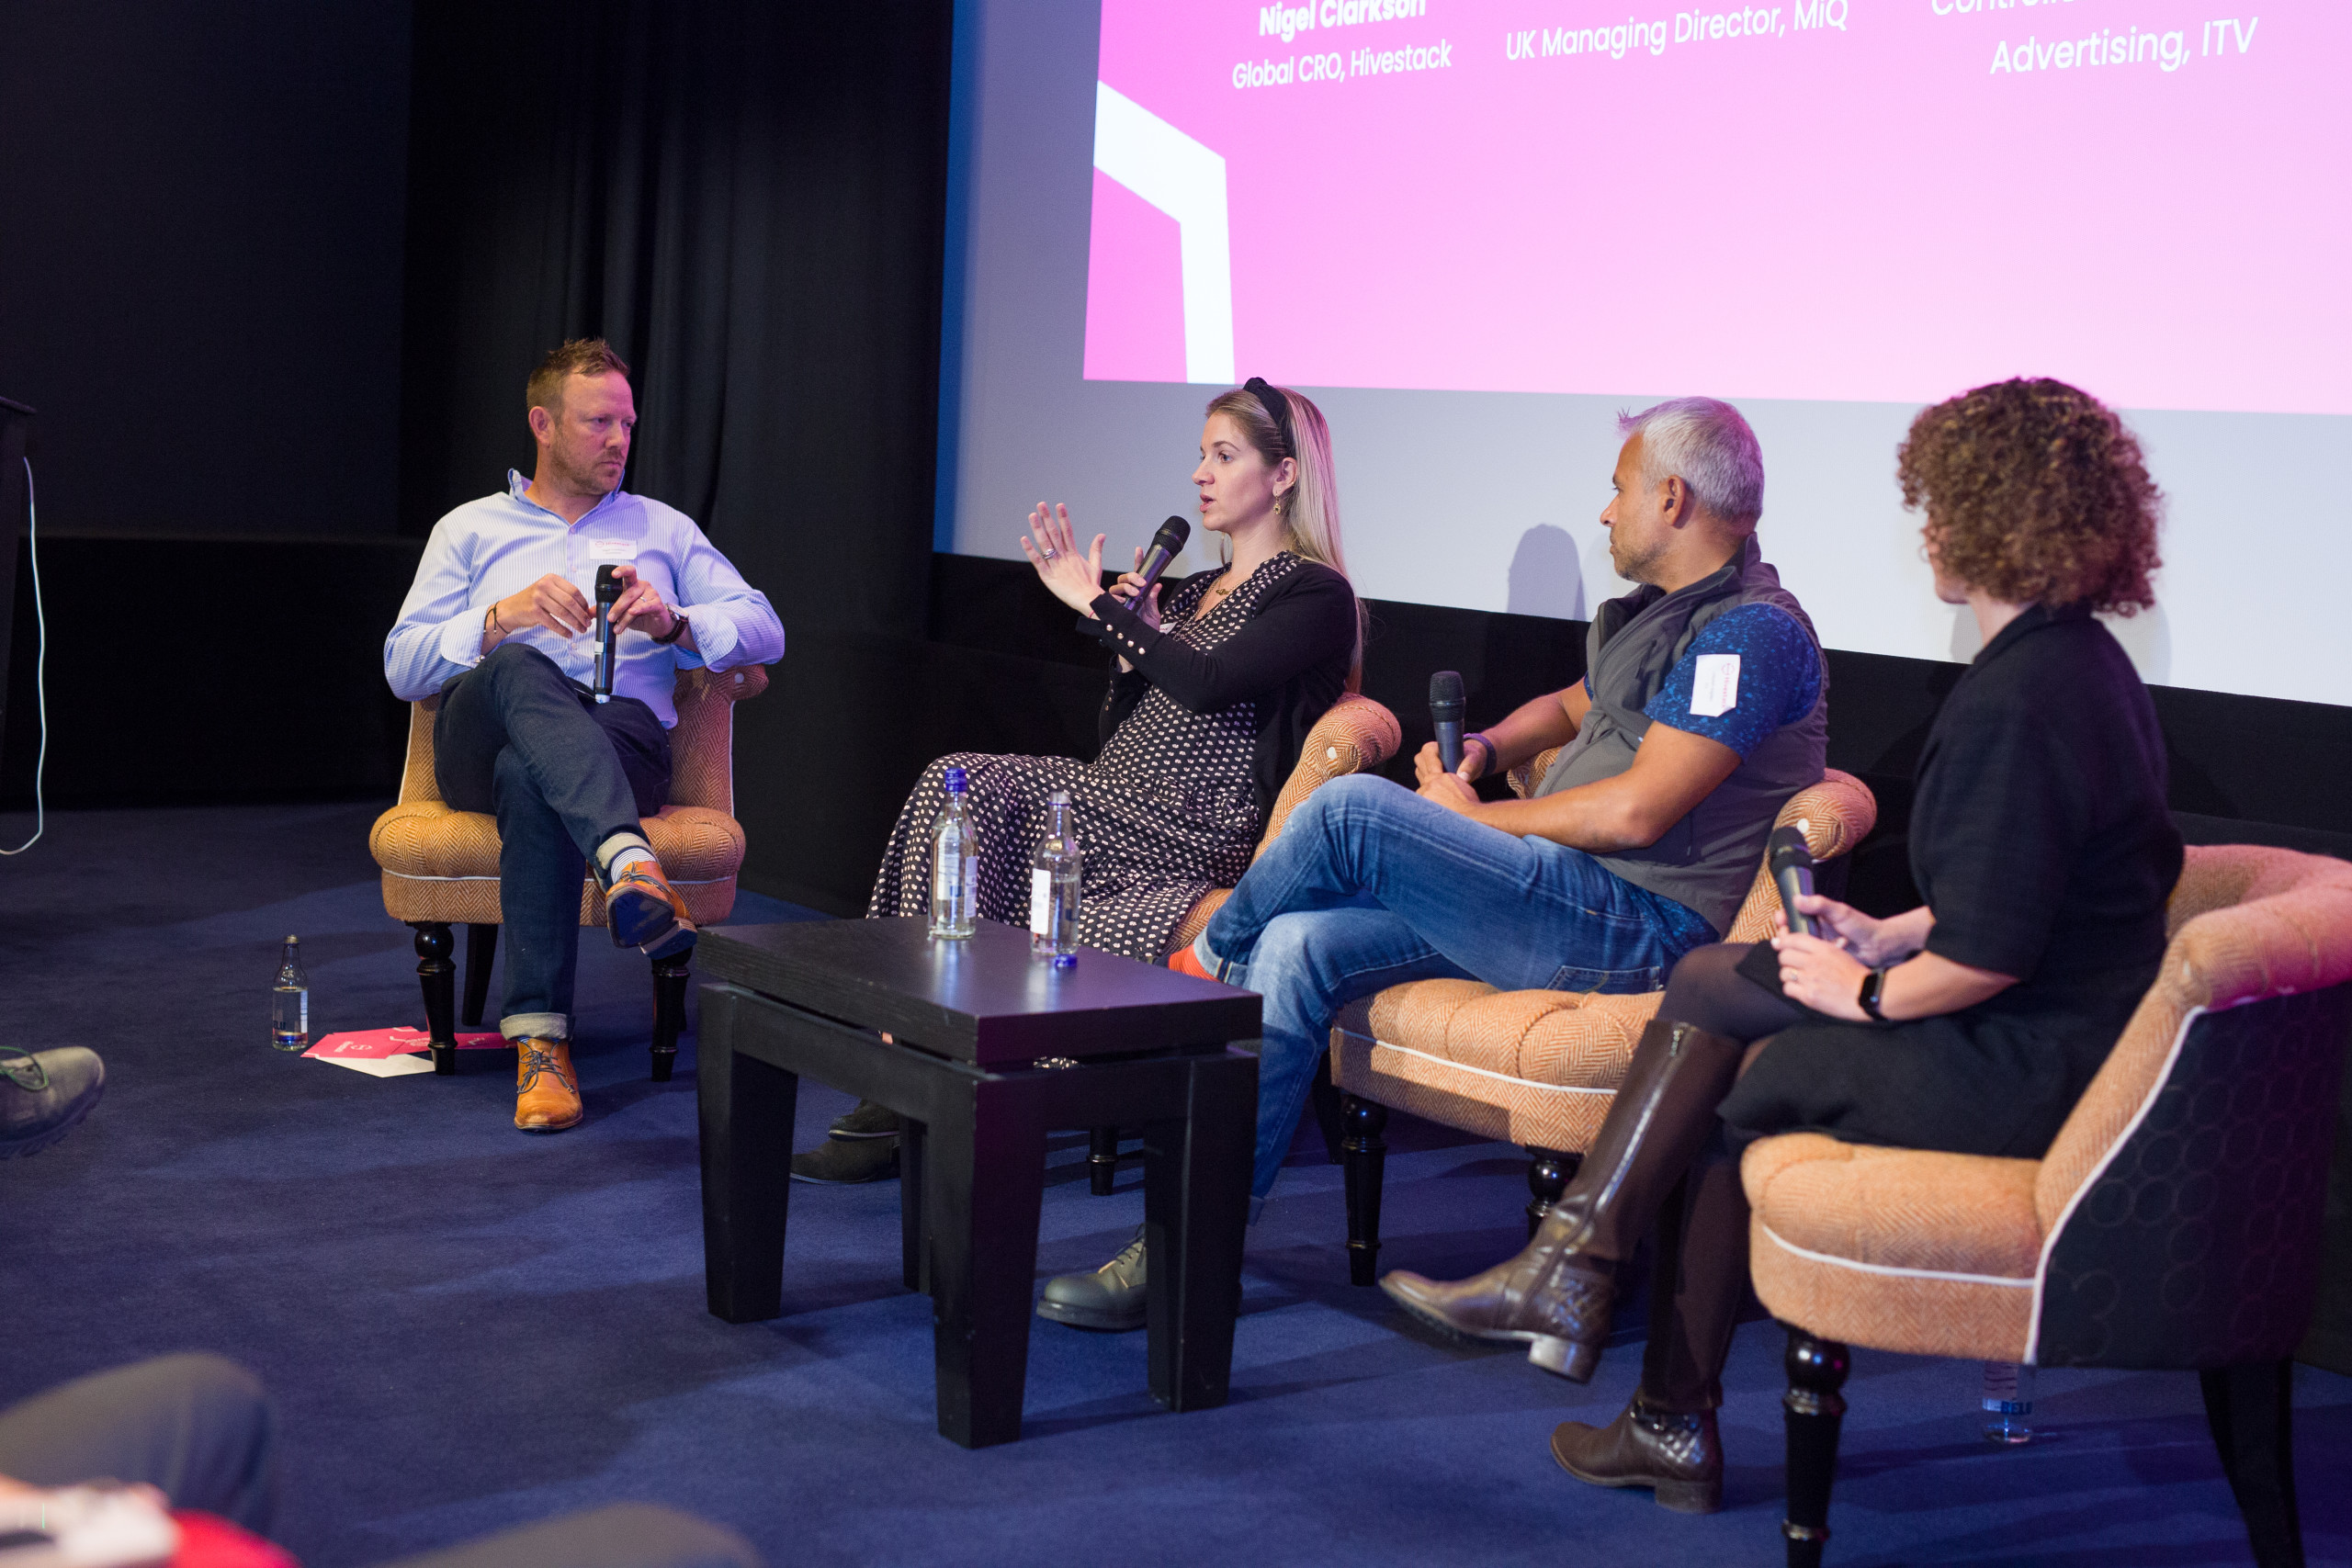 Hivestack's inaugural UK summit: How OOH is moving towards a programmatic future